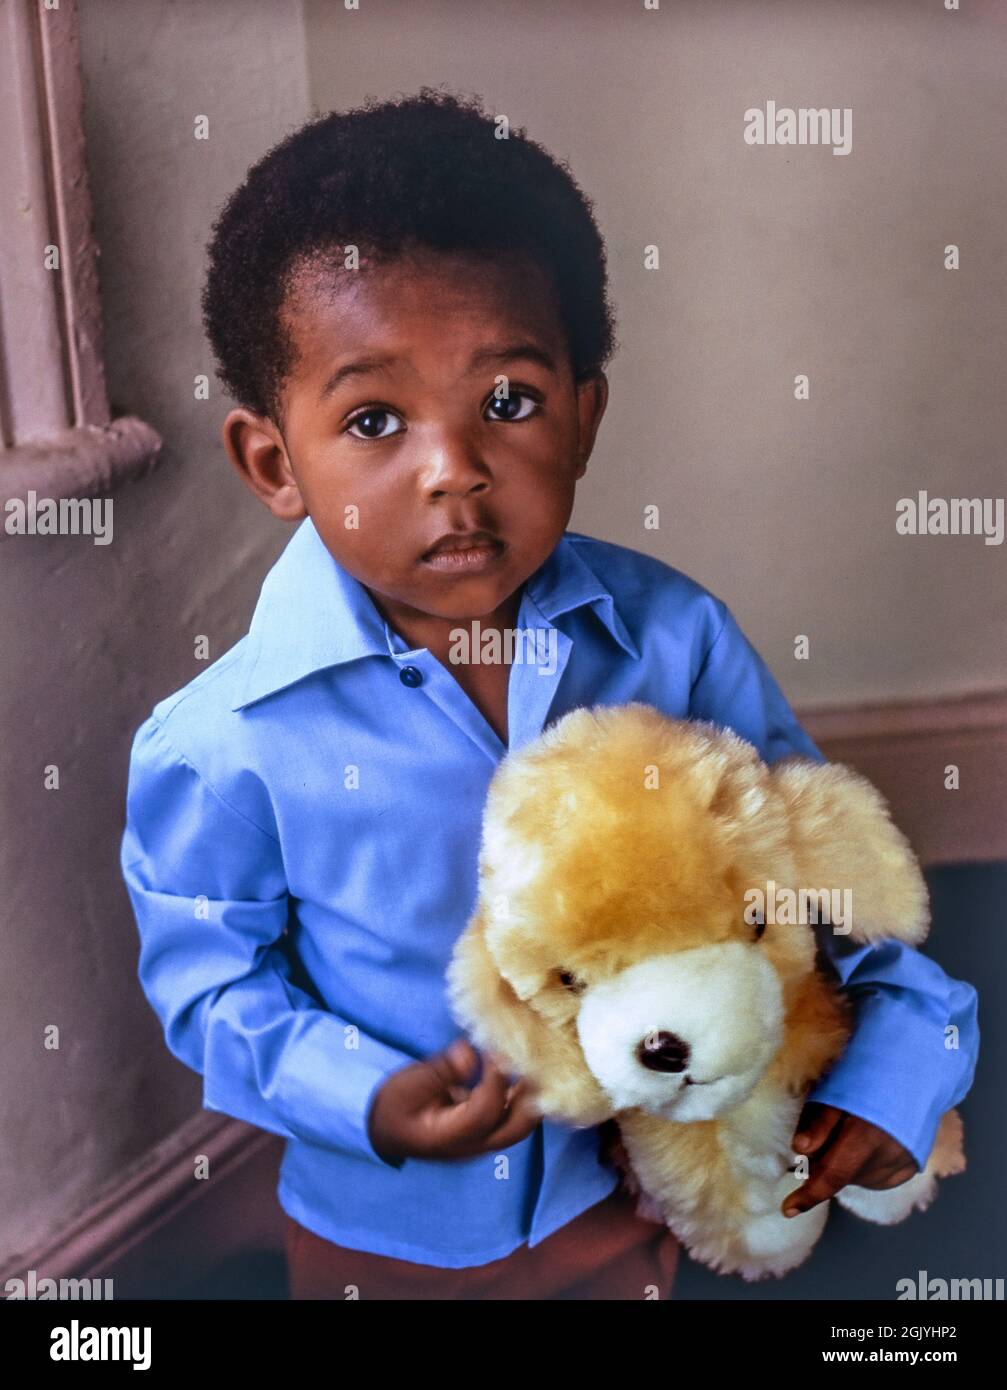 African boy 4 years posing at home cute infant African Caribbean black boy wearing his best blue shirt, holding his favourite fluffy bear. Pensive emotive expression captured in natural window light at his home Stock Photo